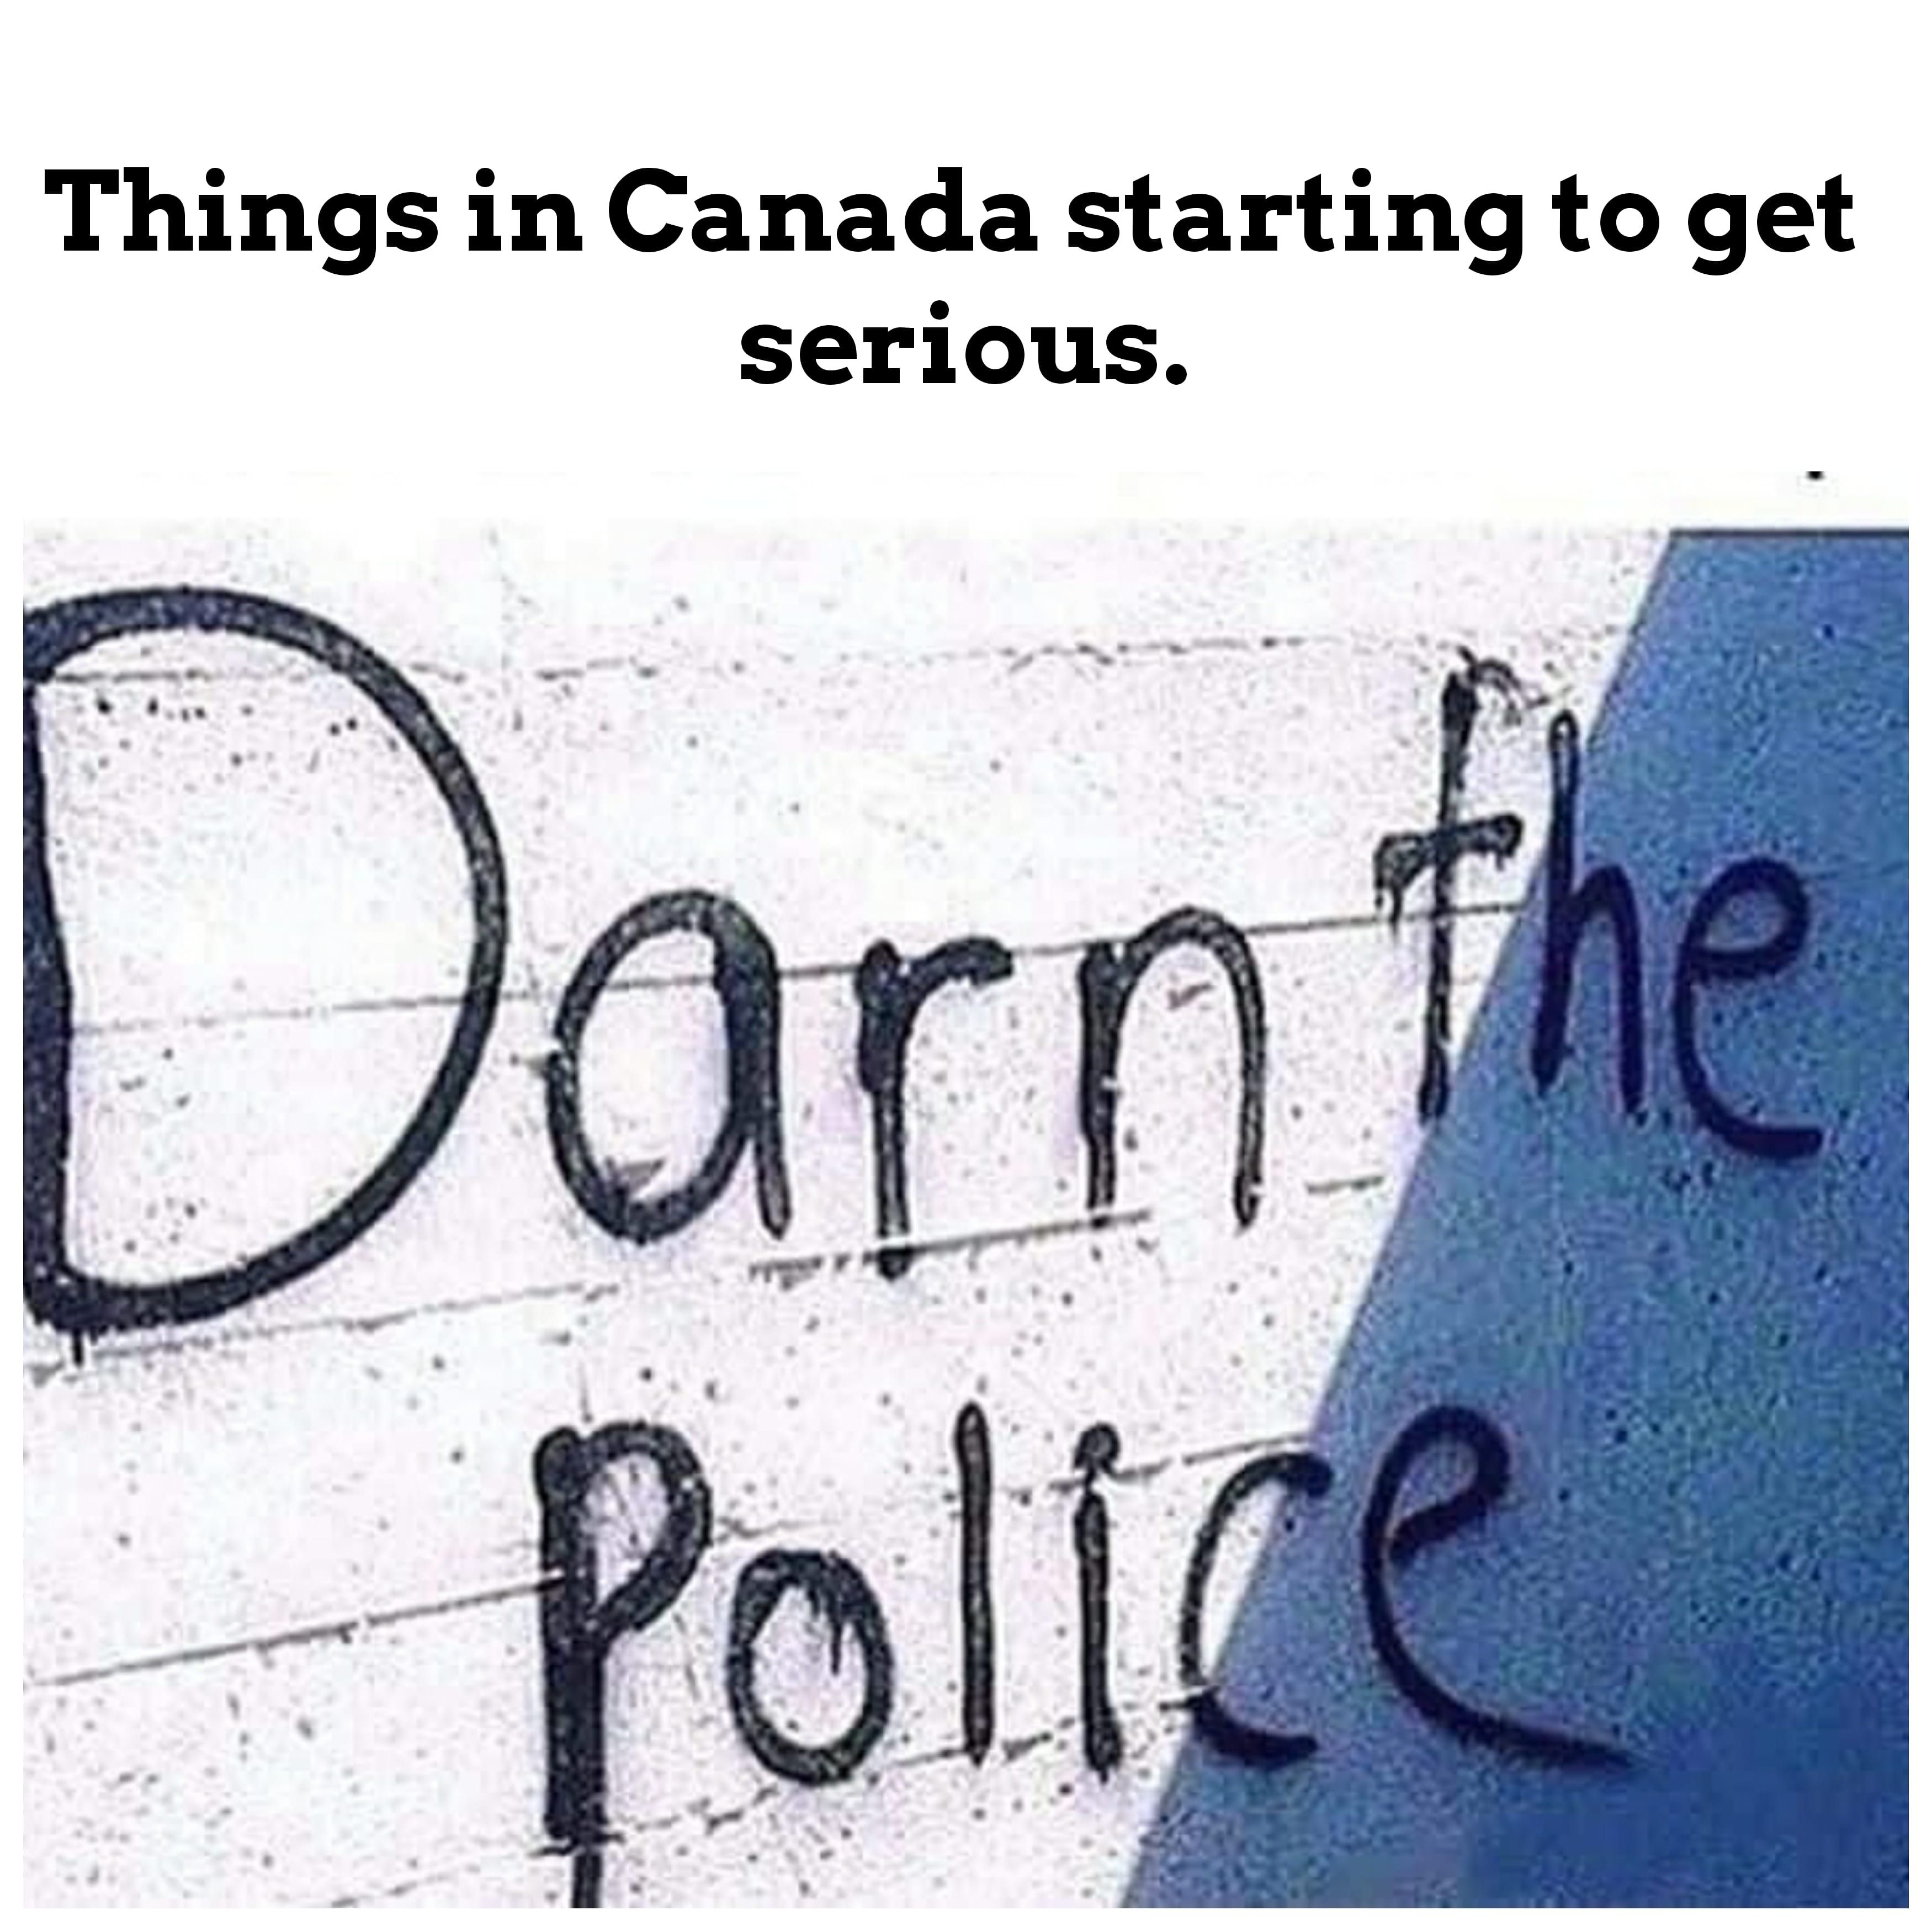 Canada is also having issues with the police!